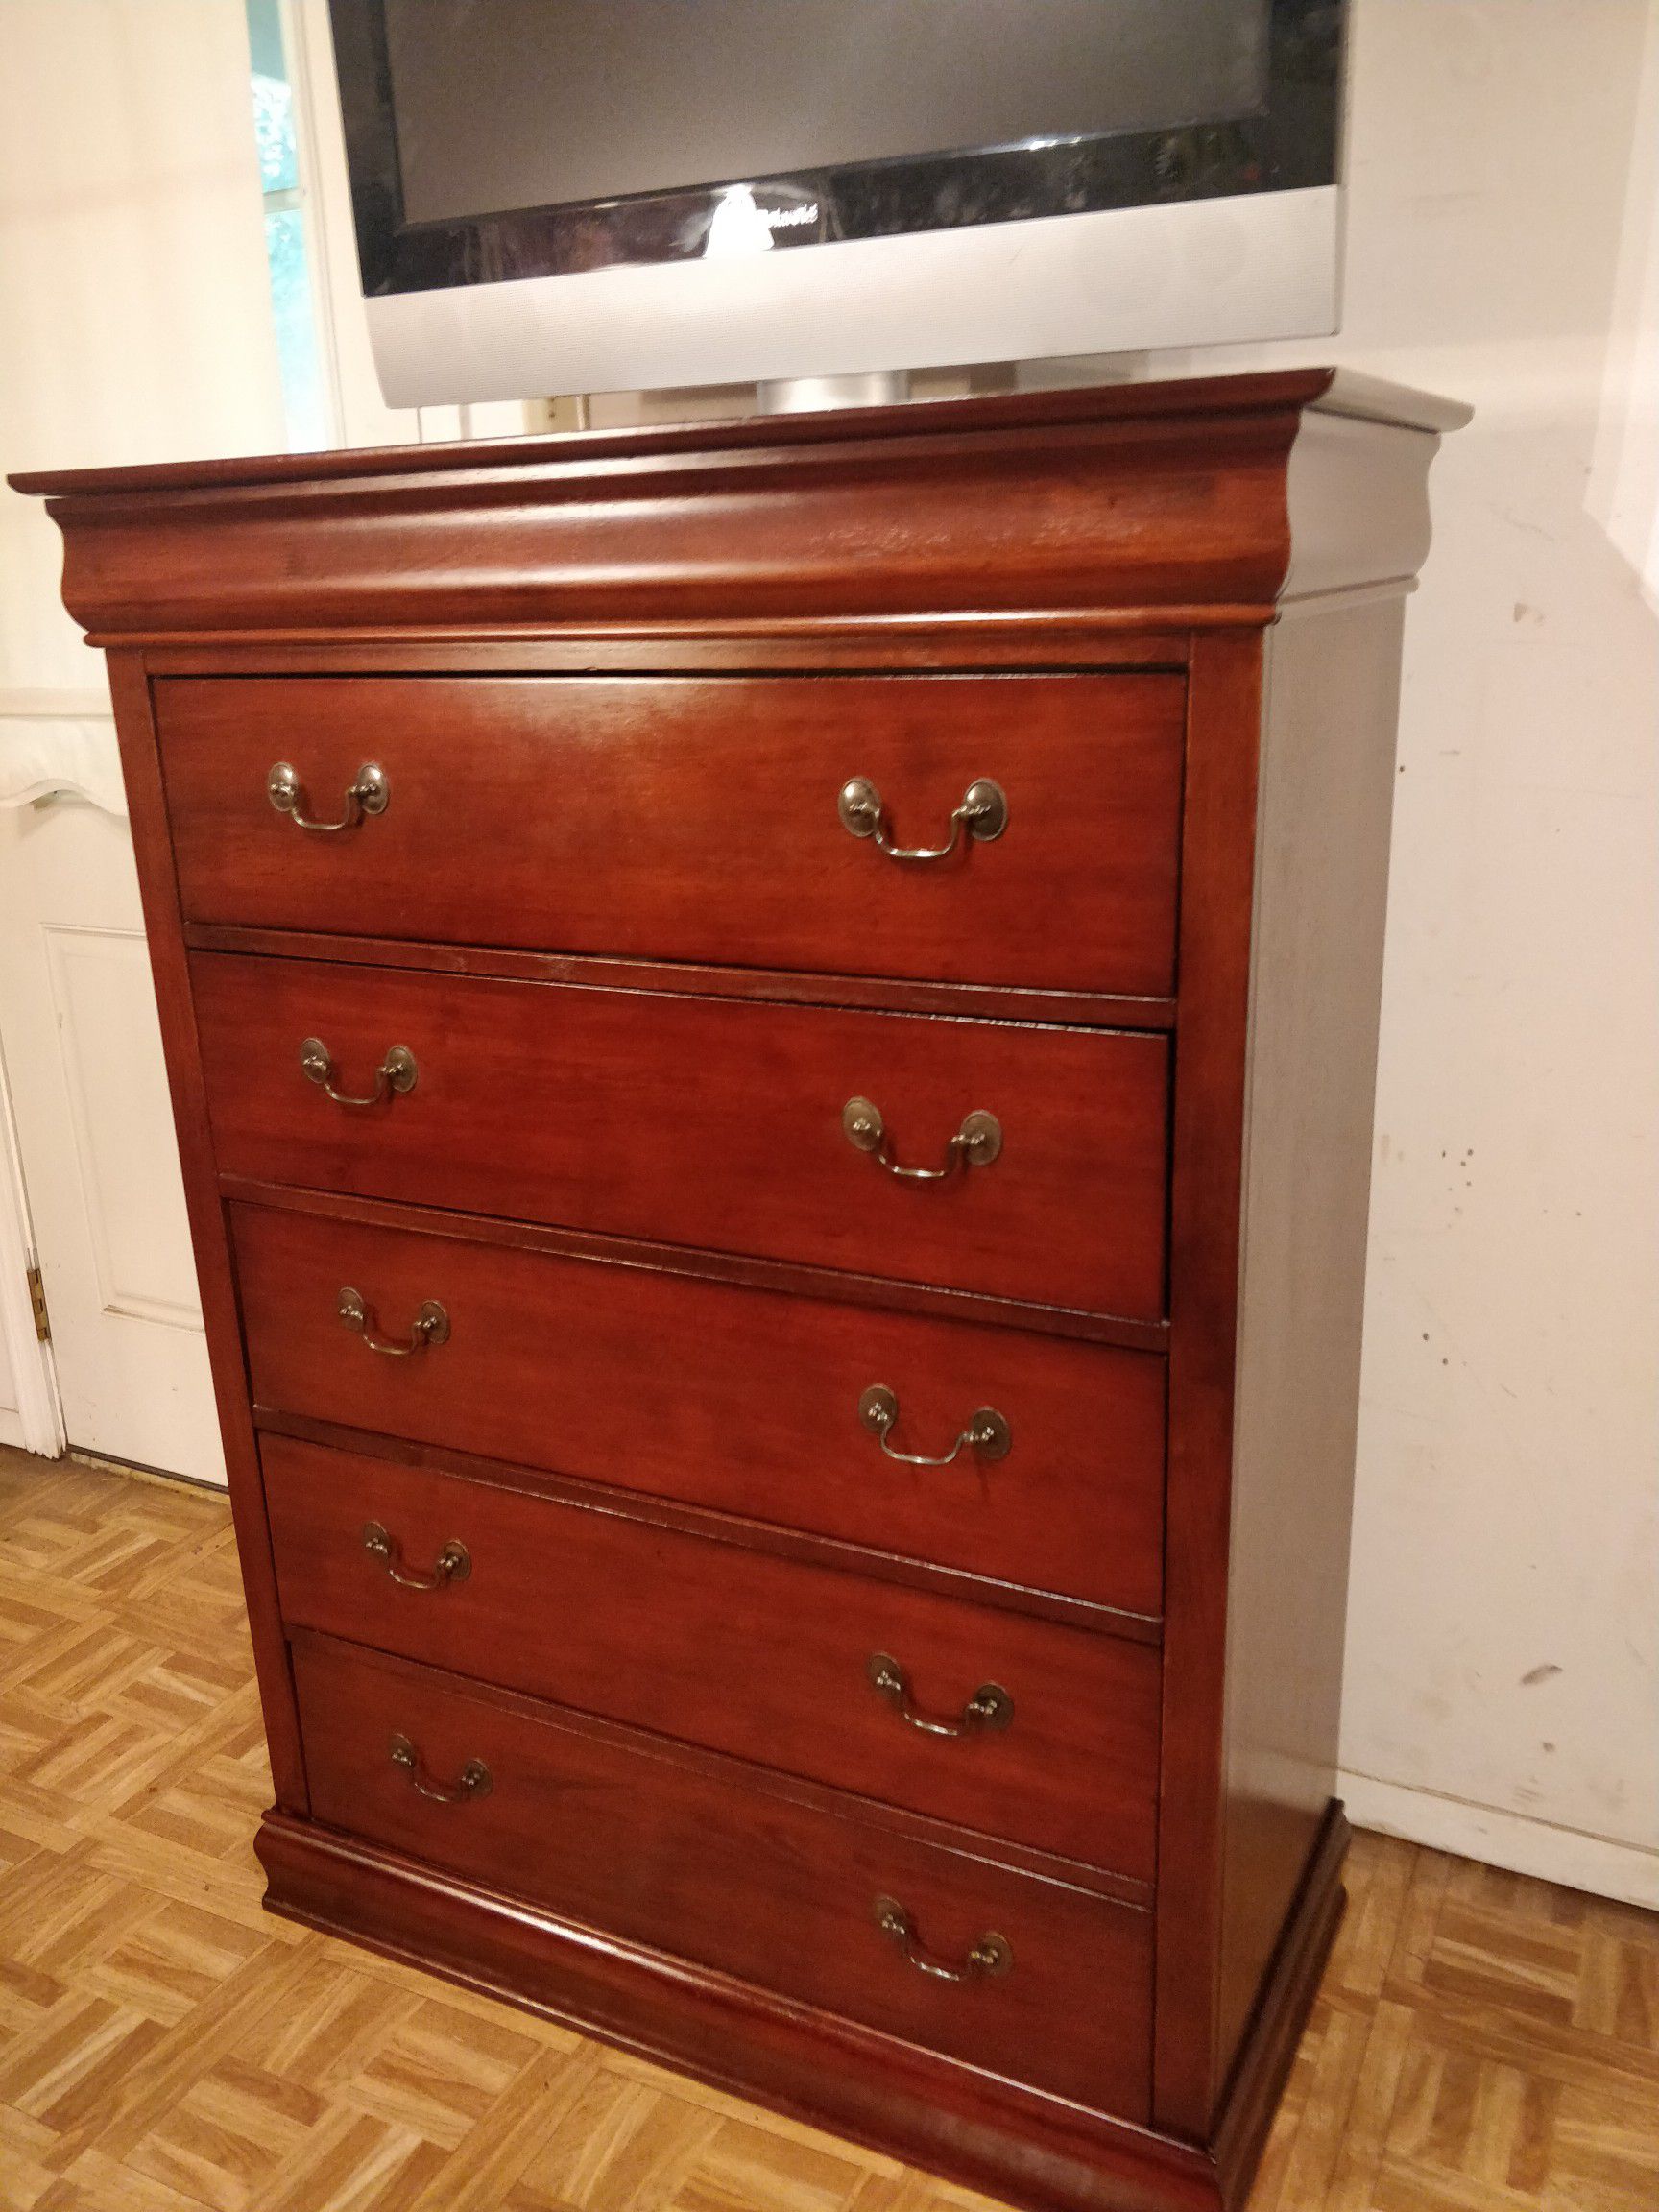 Nice wooden chest dresser with big drawers in very good condition, all drawers sliding smoothly. L38"*W18"*H50.5"